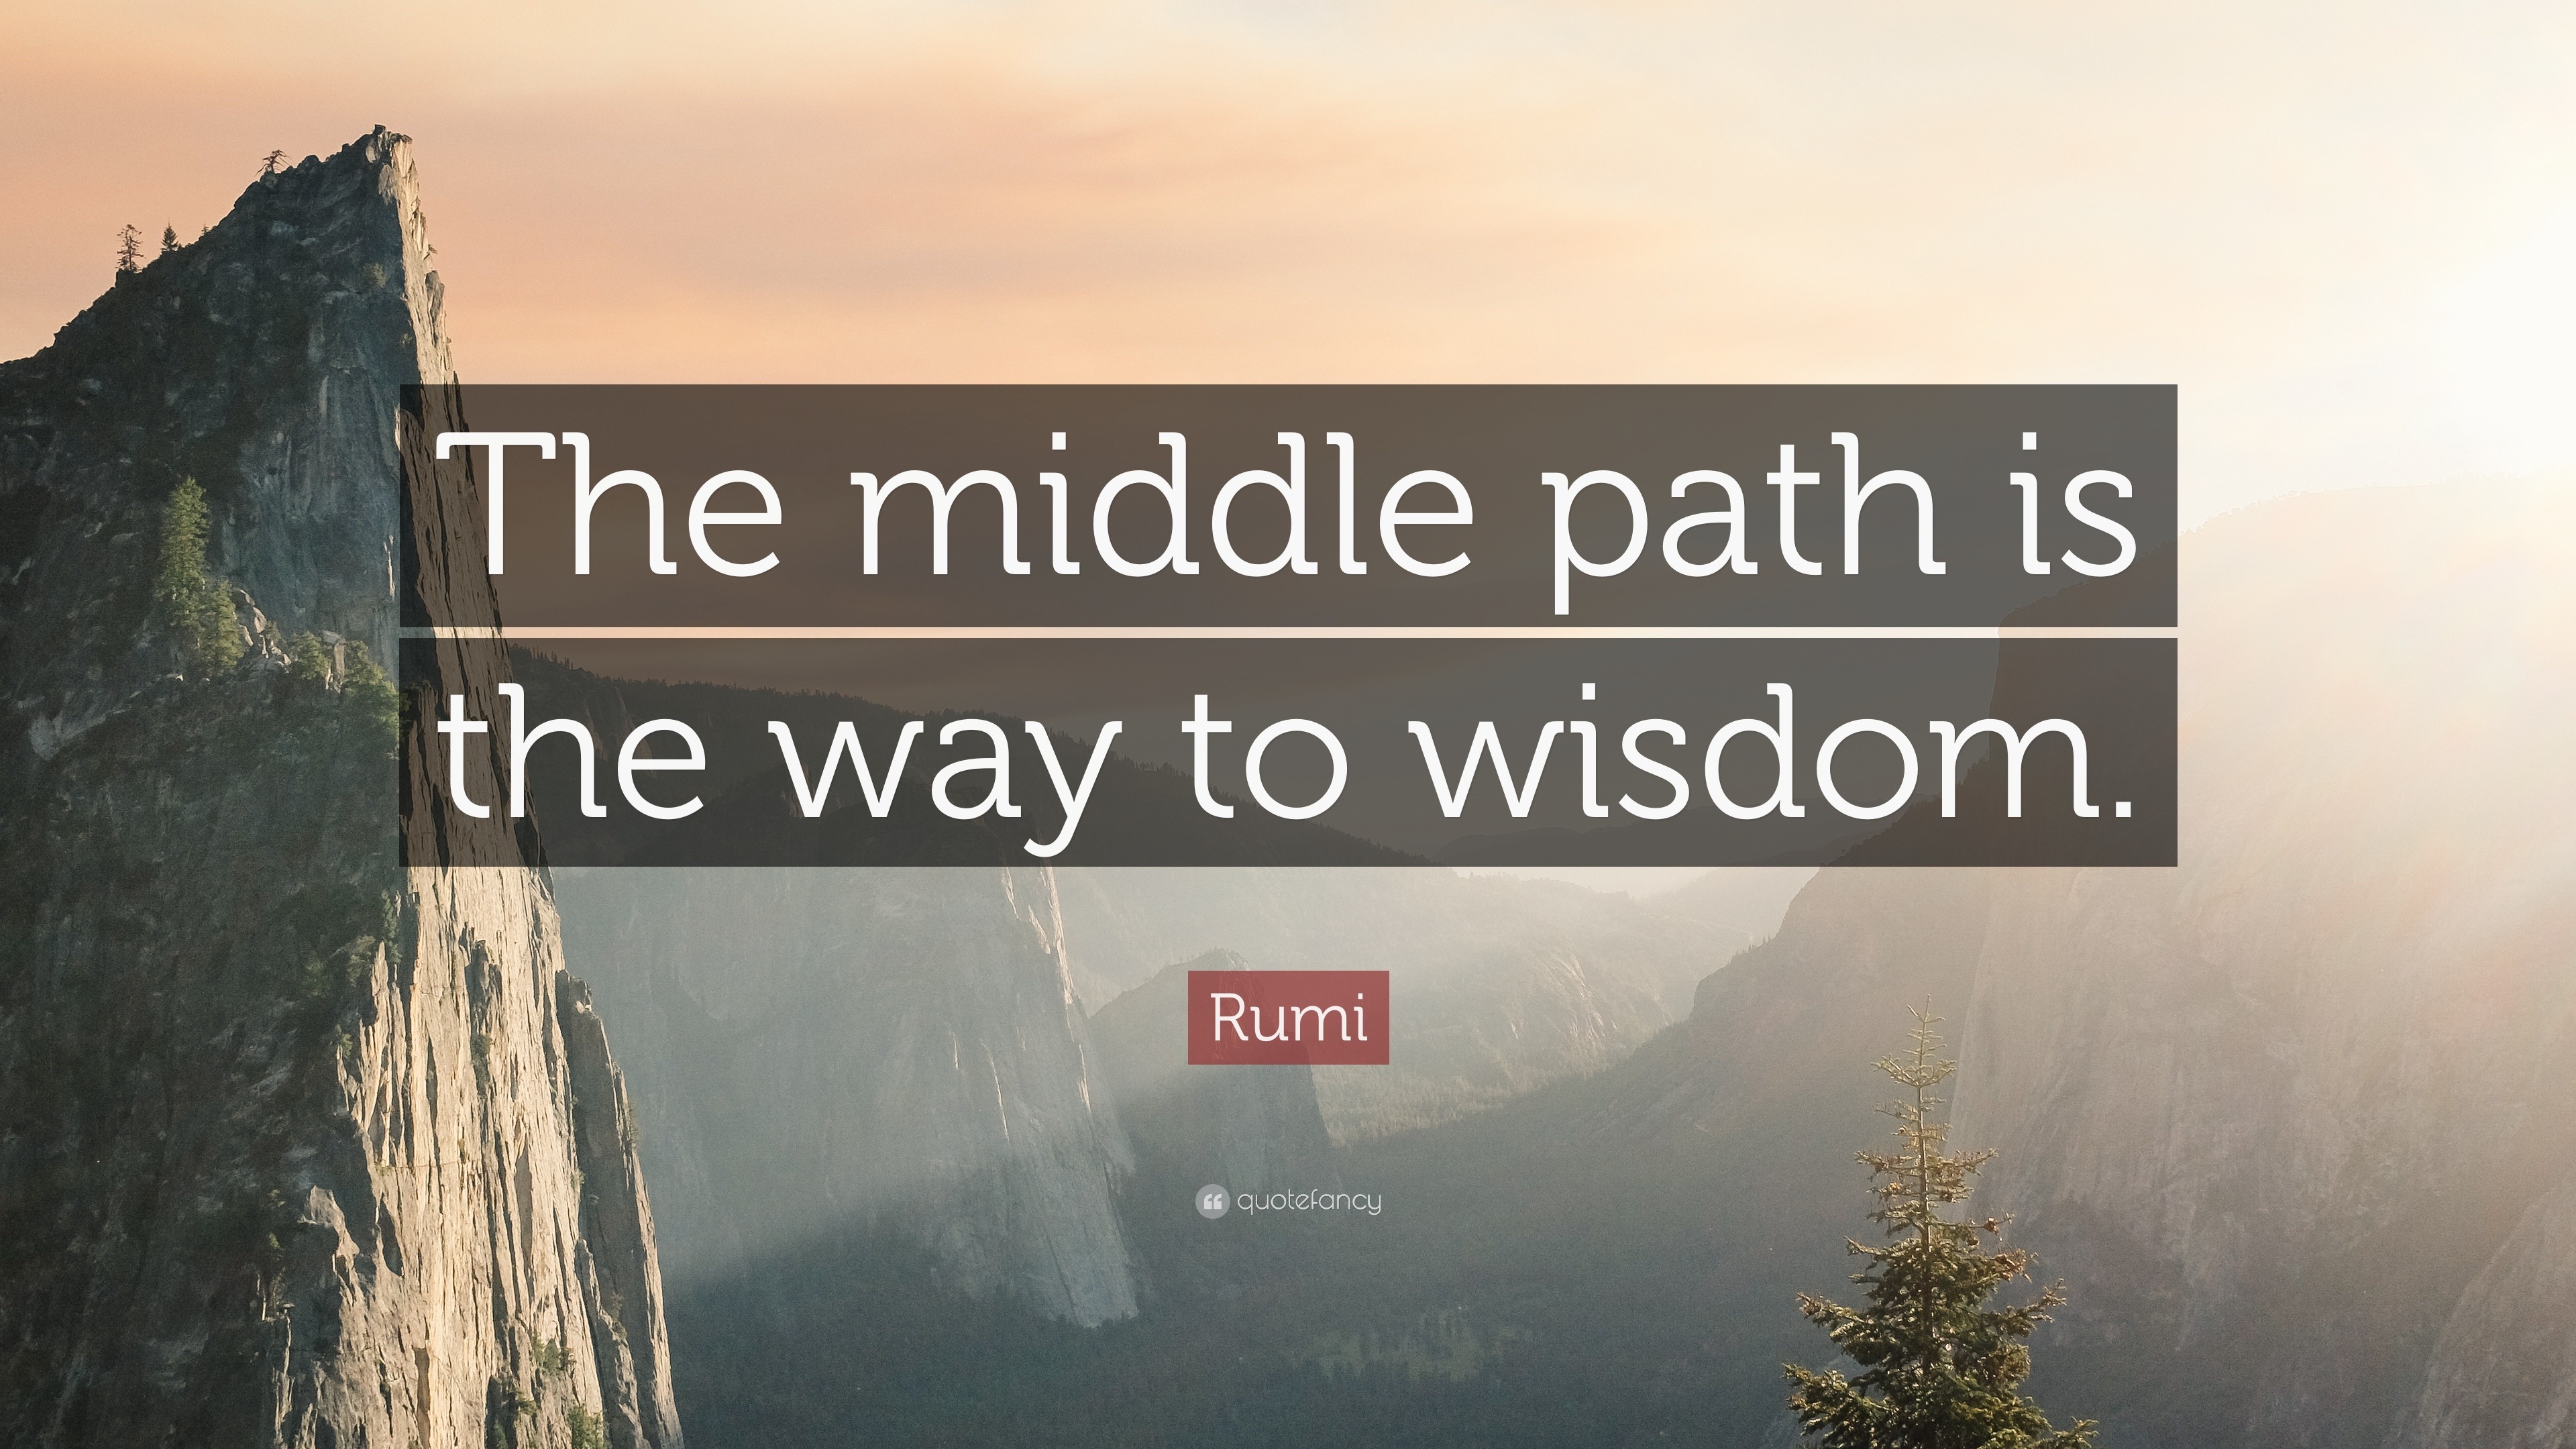 Rumi Quote: “The middle path is the way to wisdom.”